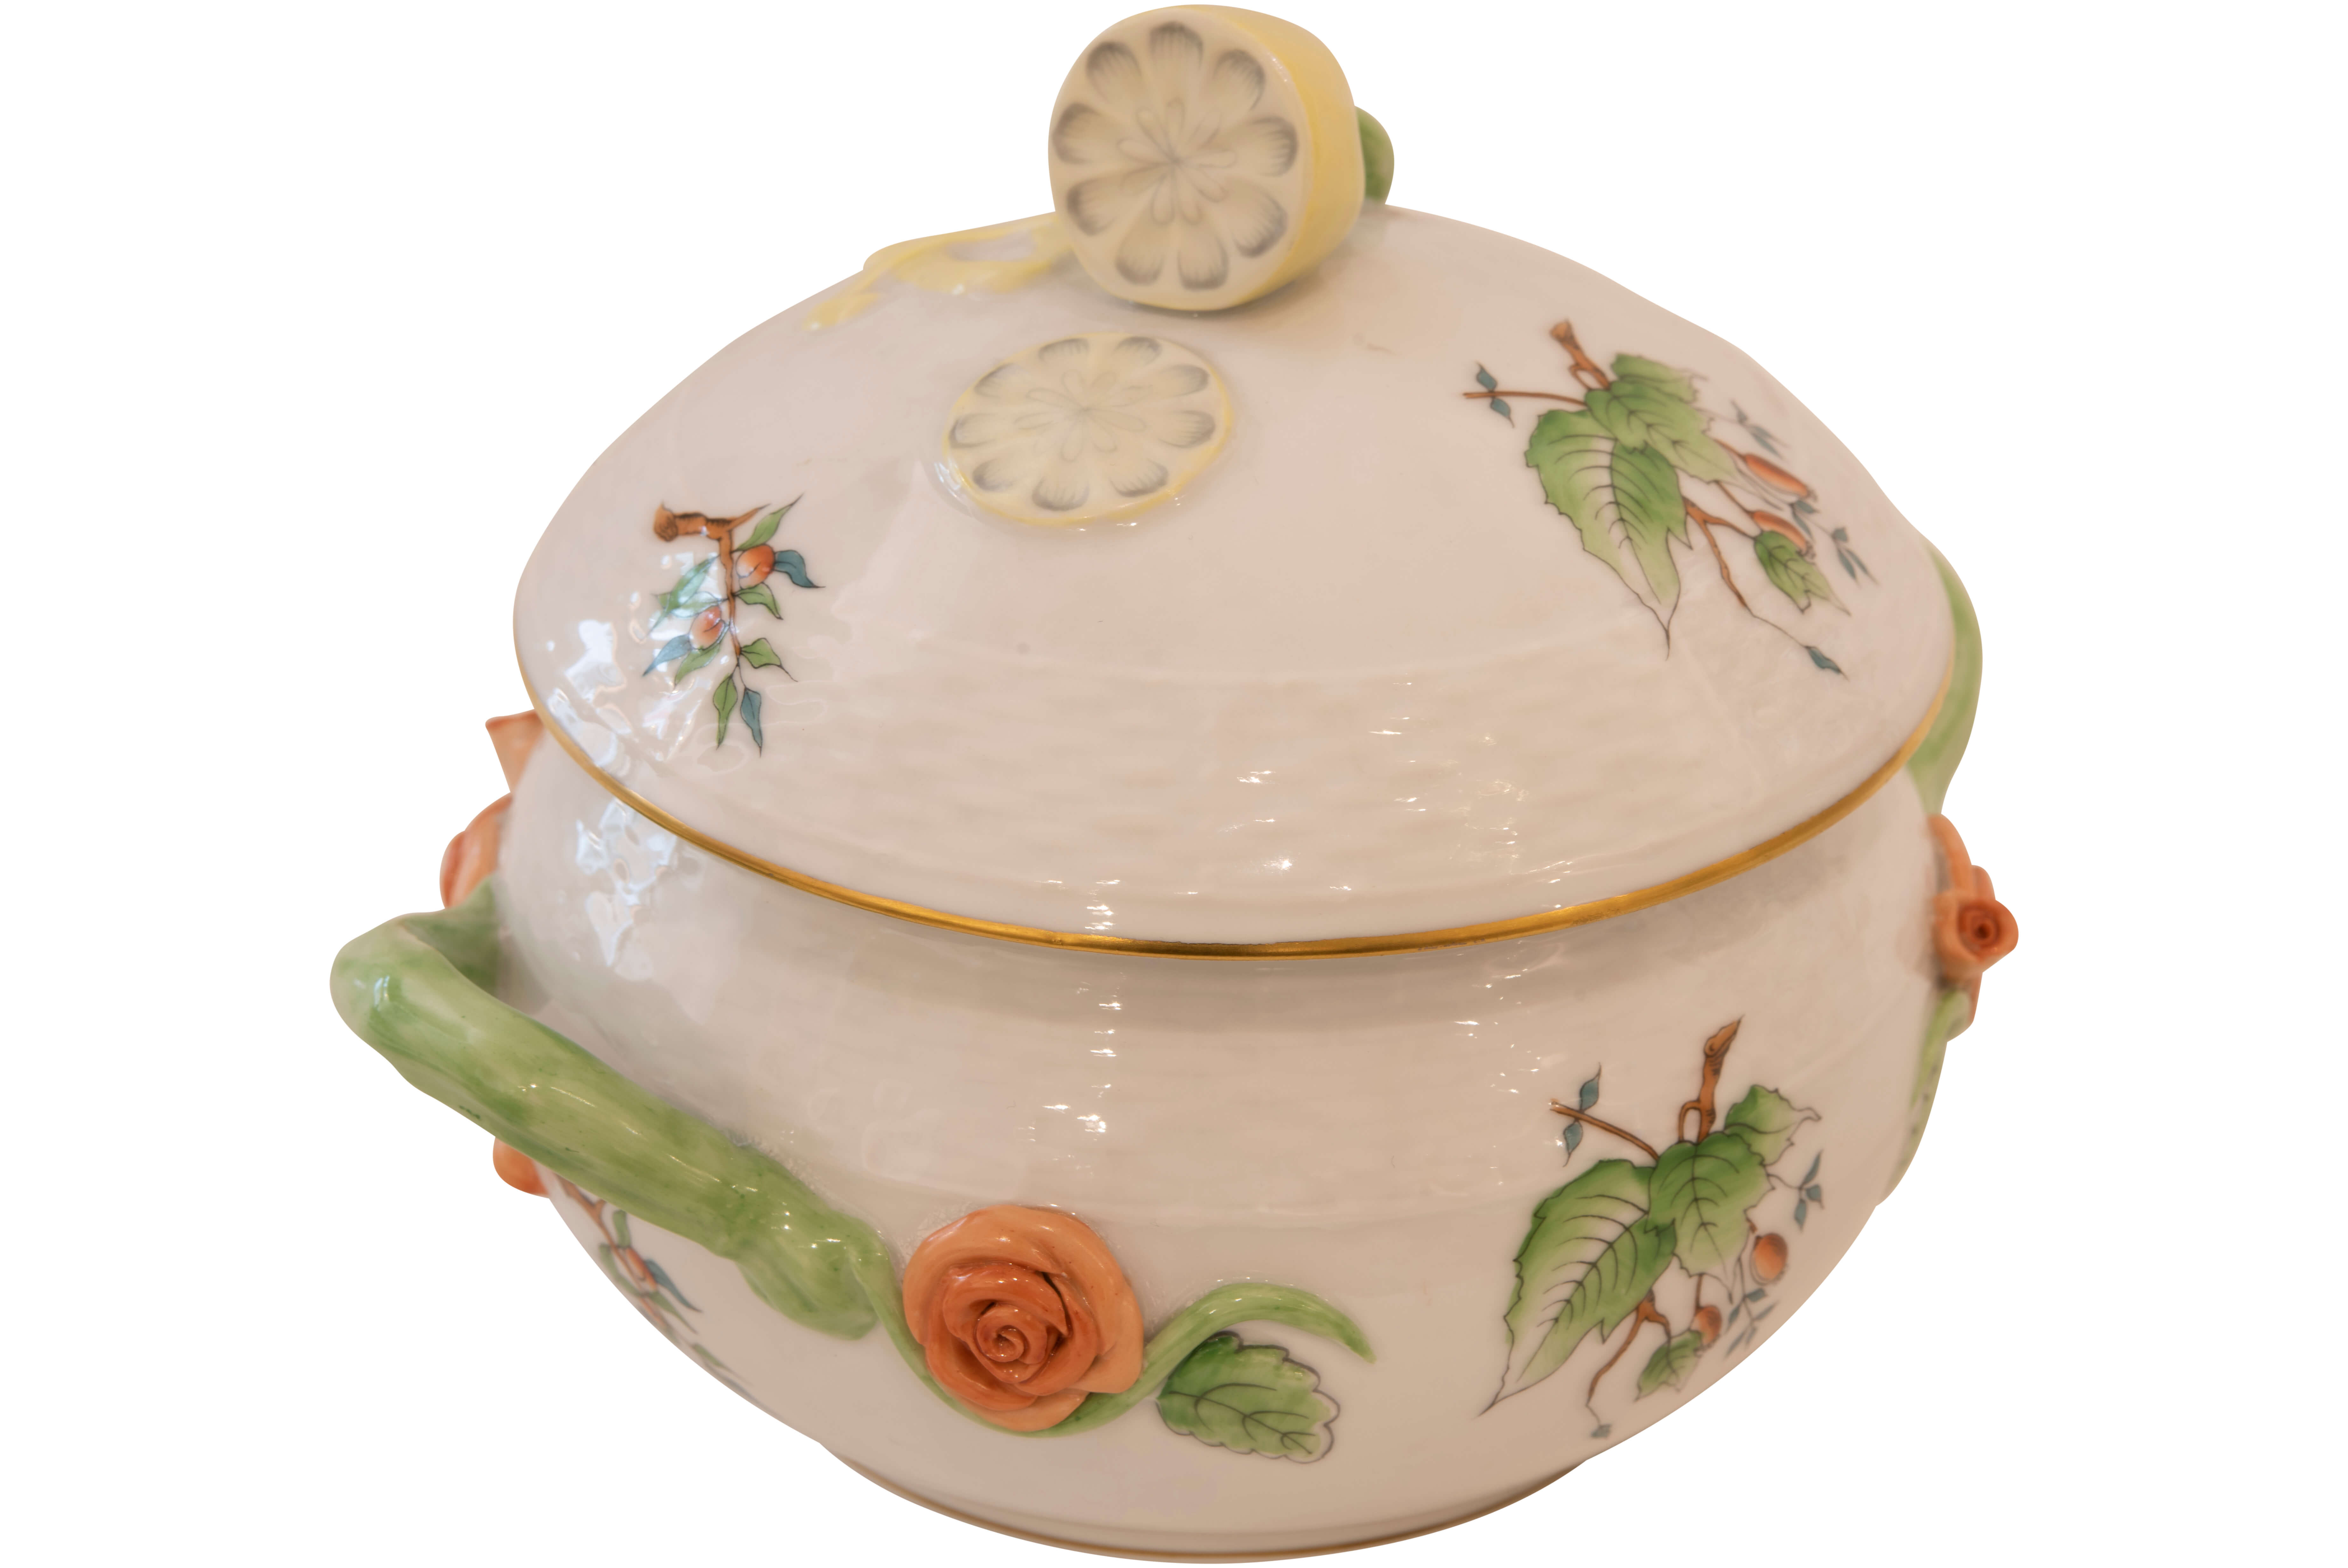 Herend Ungarn Suppenterrine mit ovaler Servierplatte|Herend Hungary Soup Tureen with Oval Serving Pl - Image 3 of 5